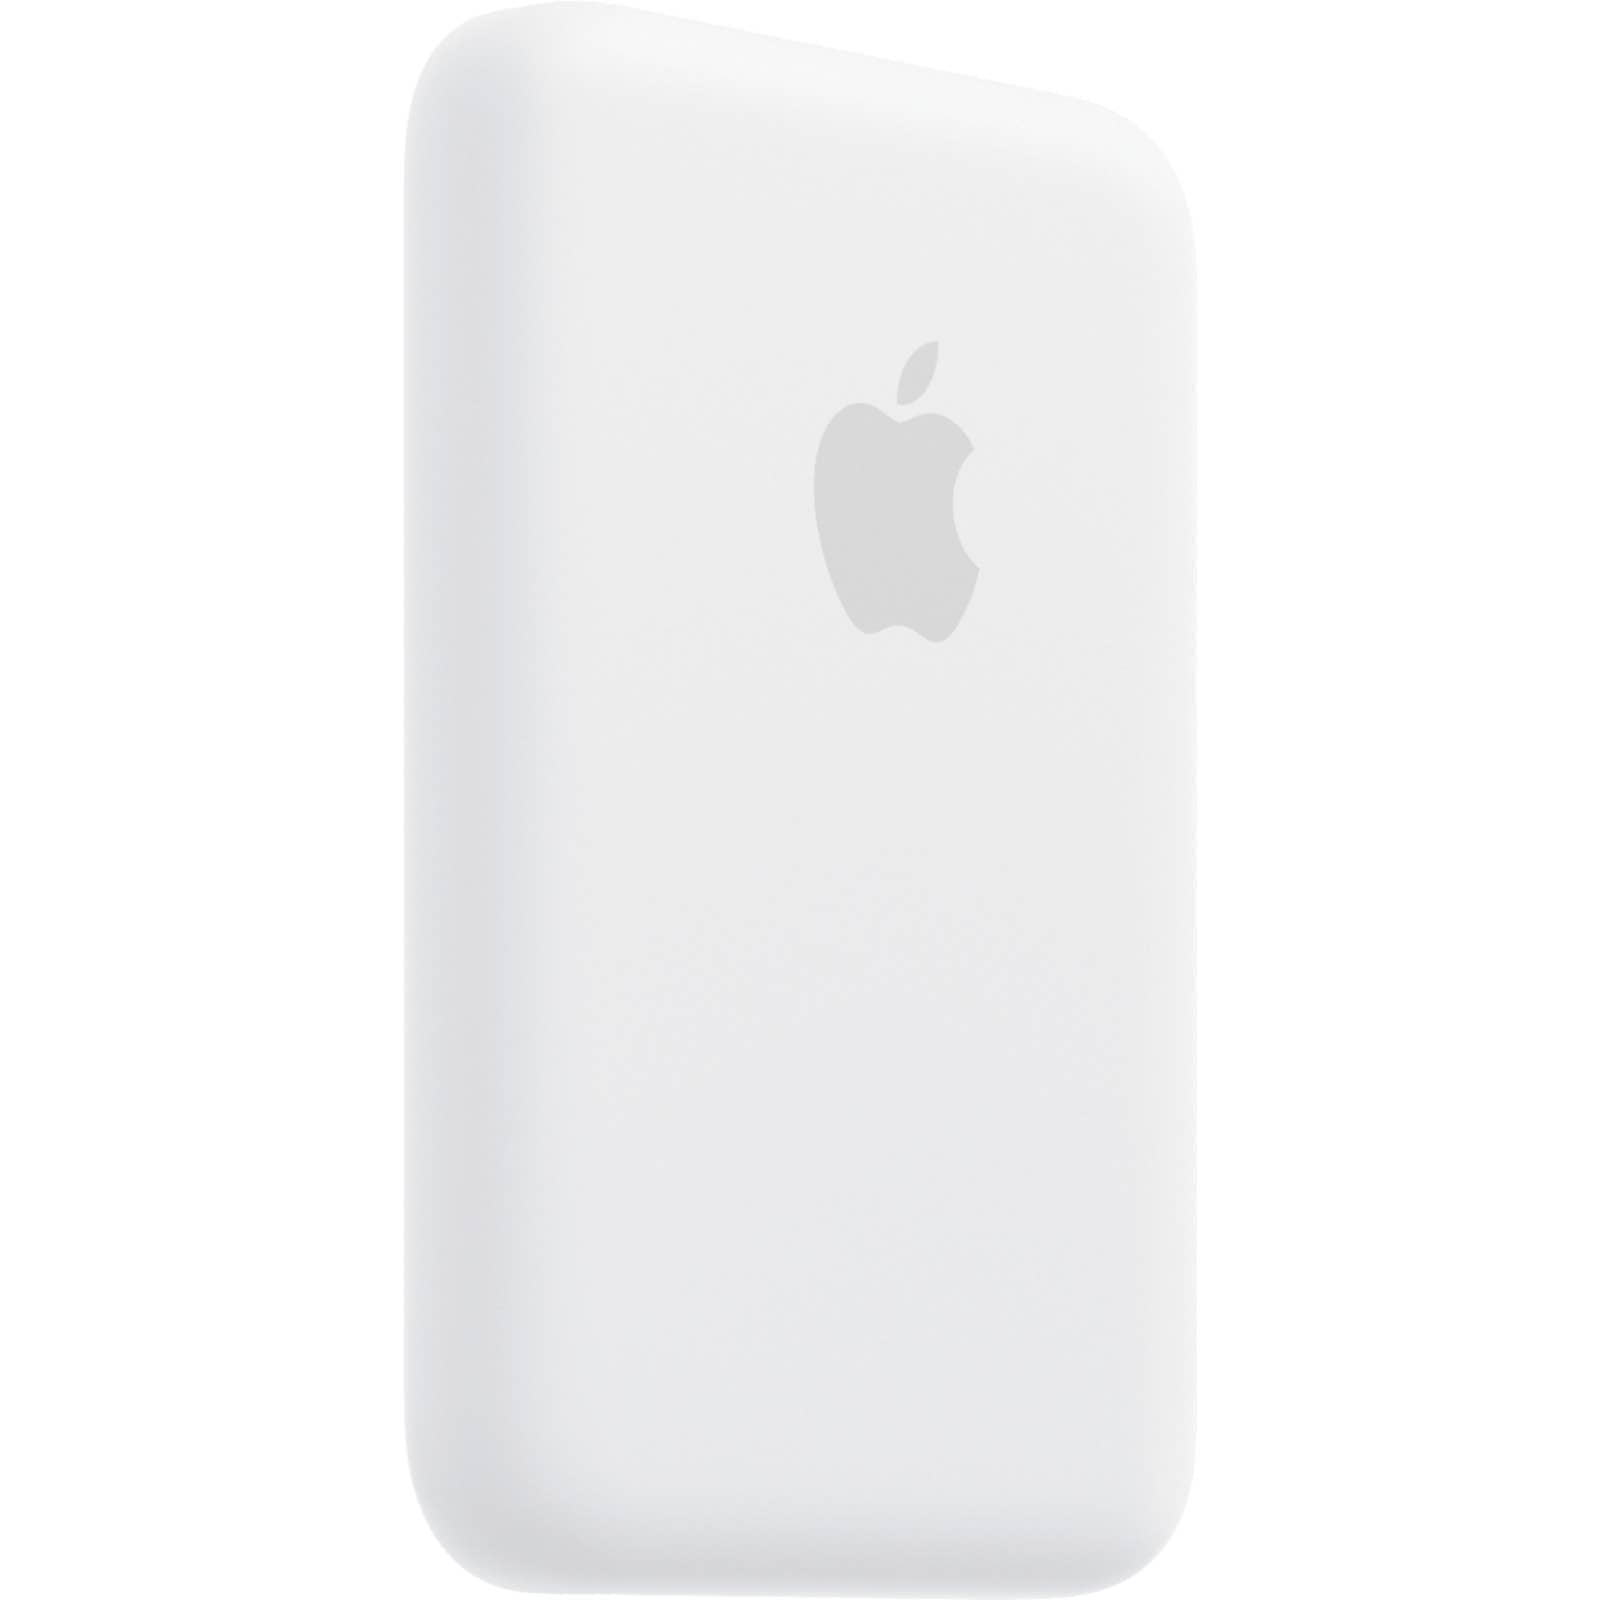 Apple - MJWY3AM/A MagSafe Battery Pack - White